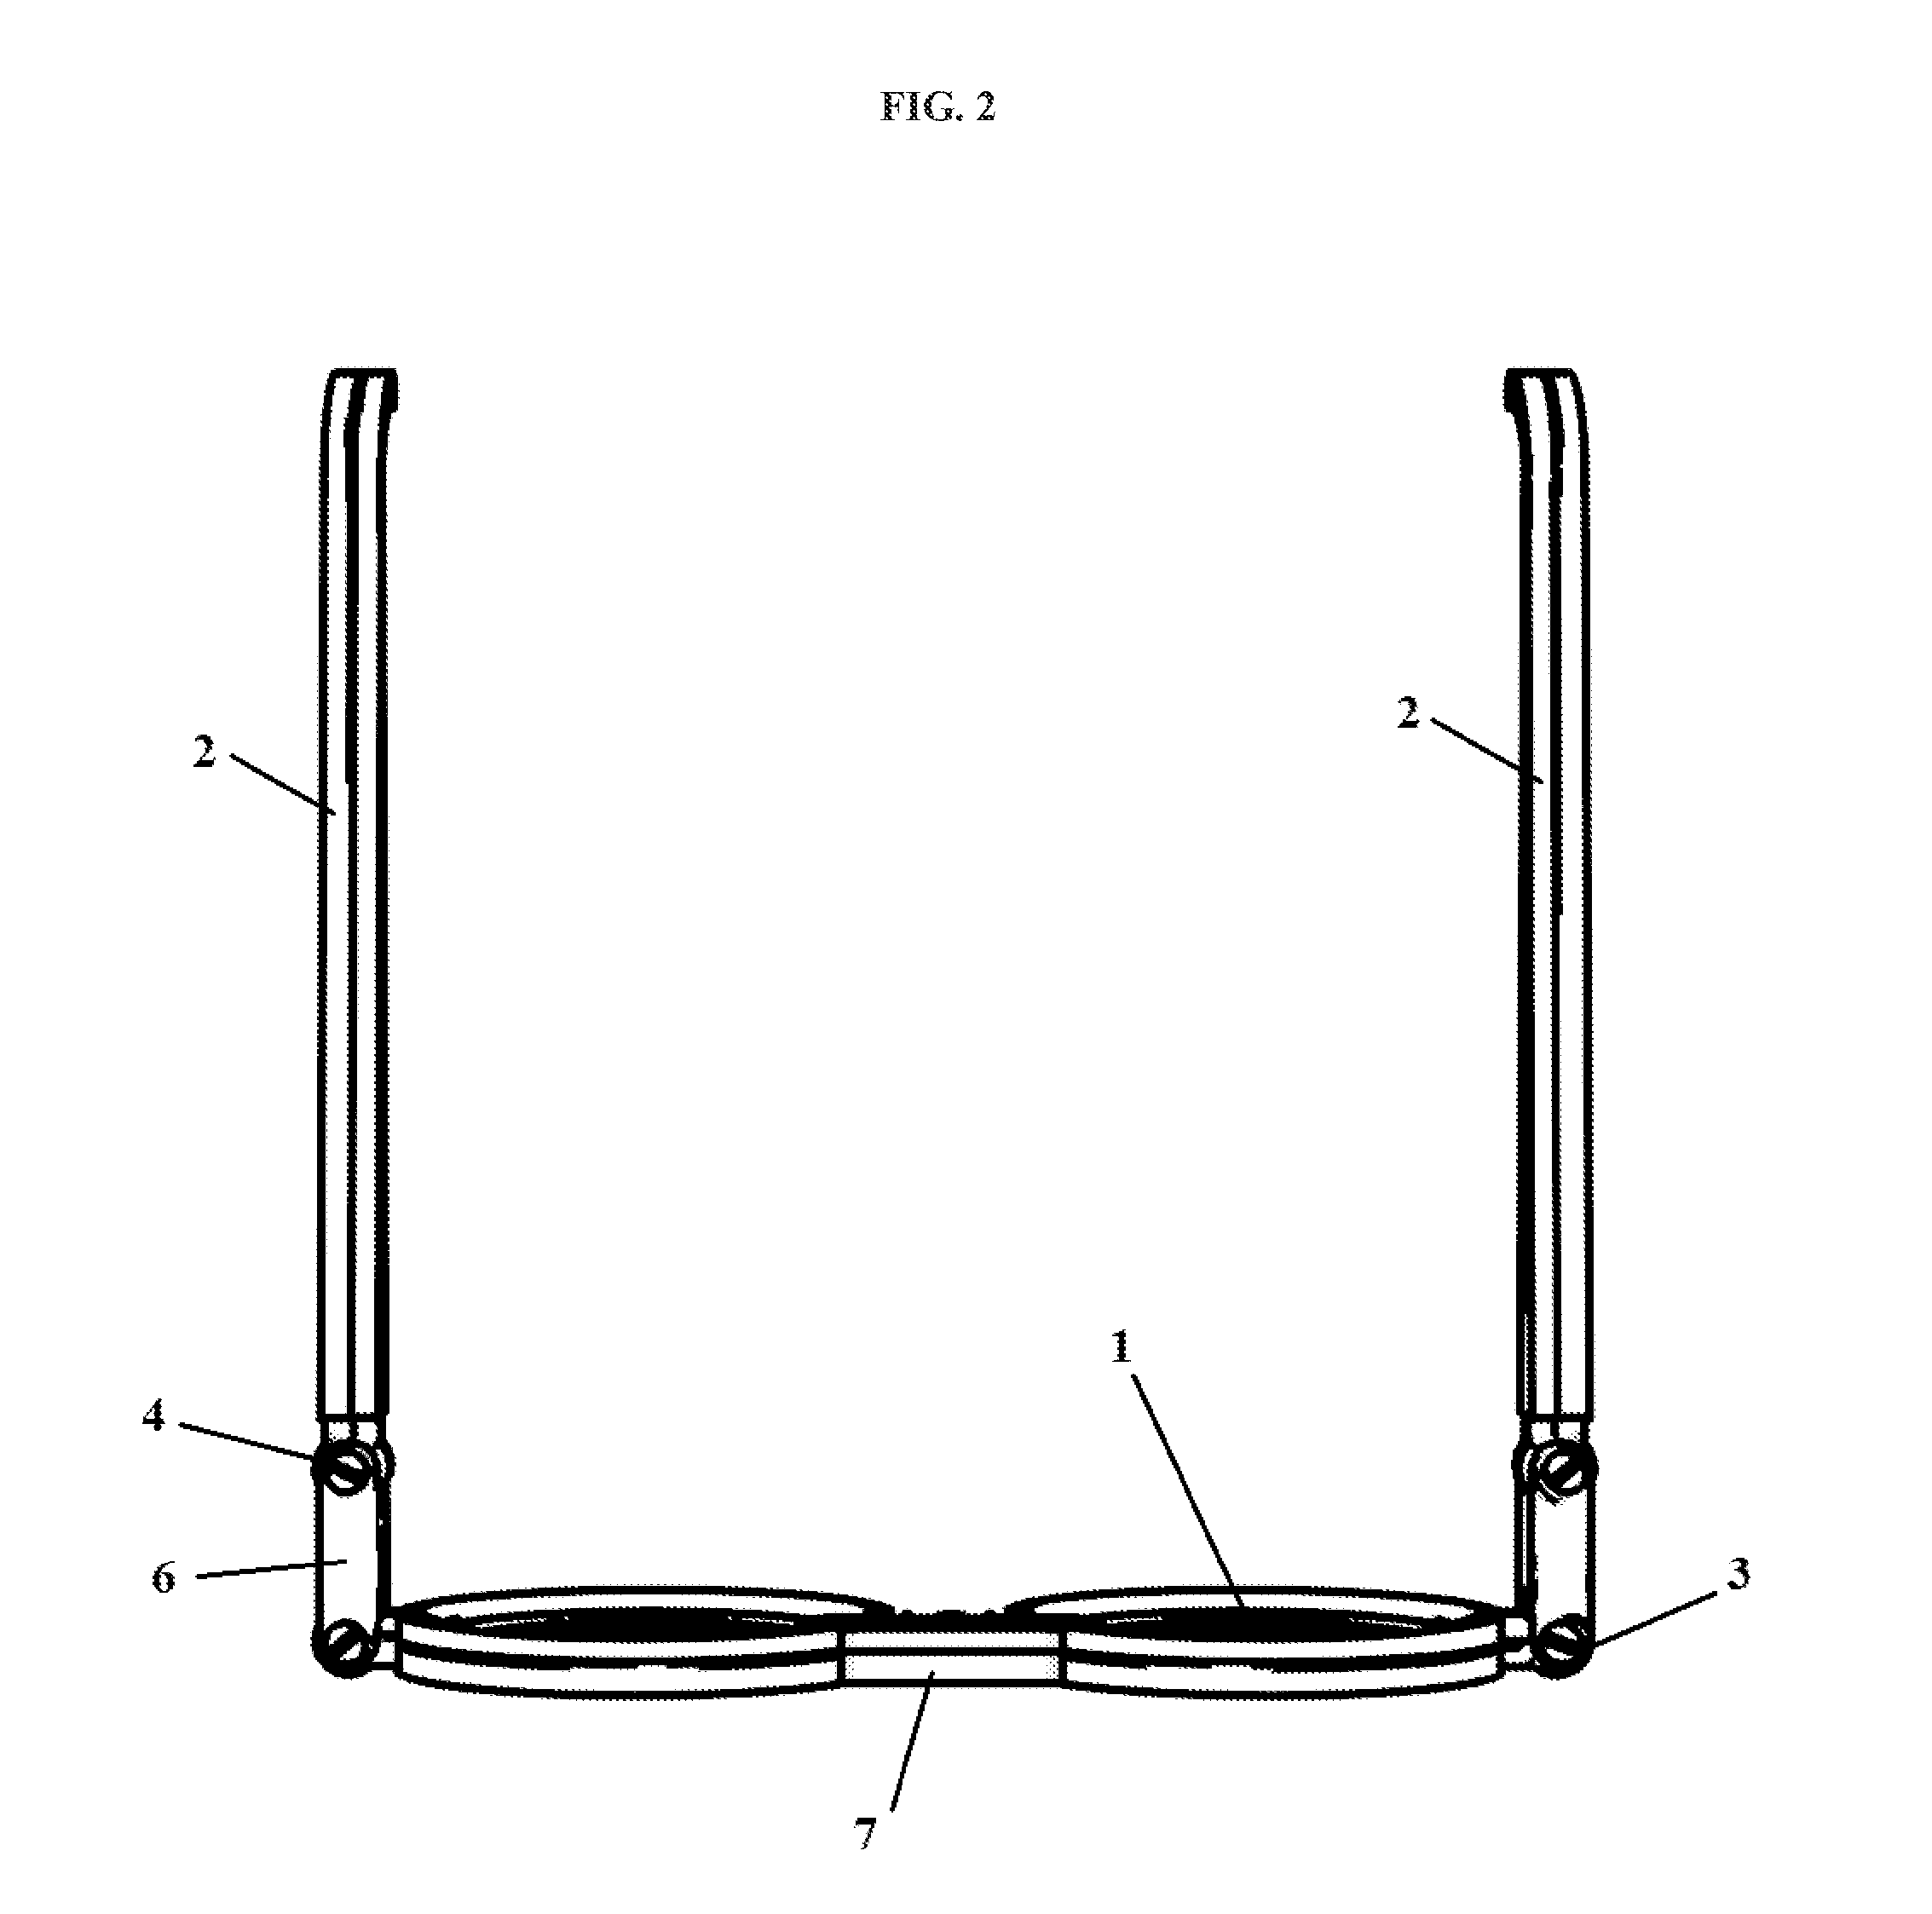 Reversable adjustable eyeglasses with polarized and/or prescription lenses